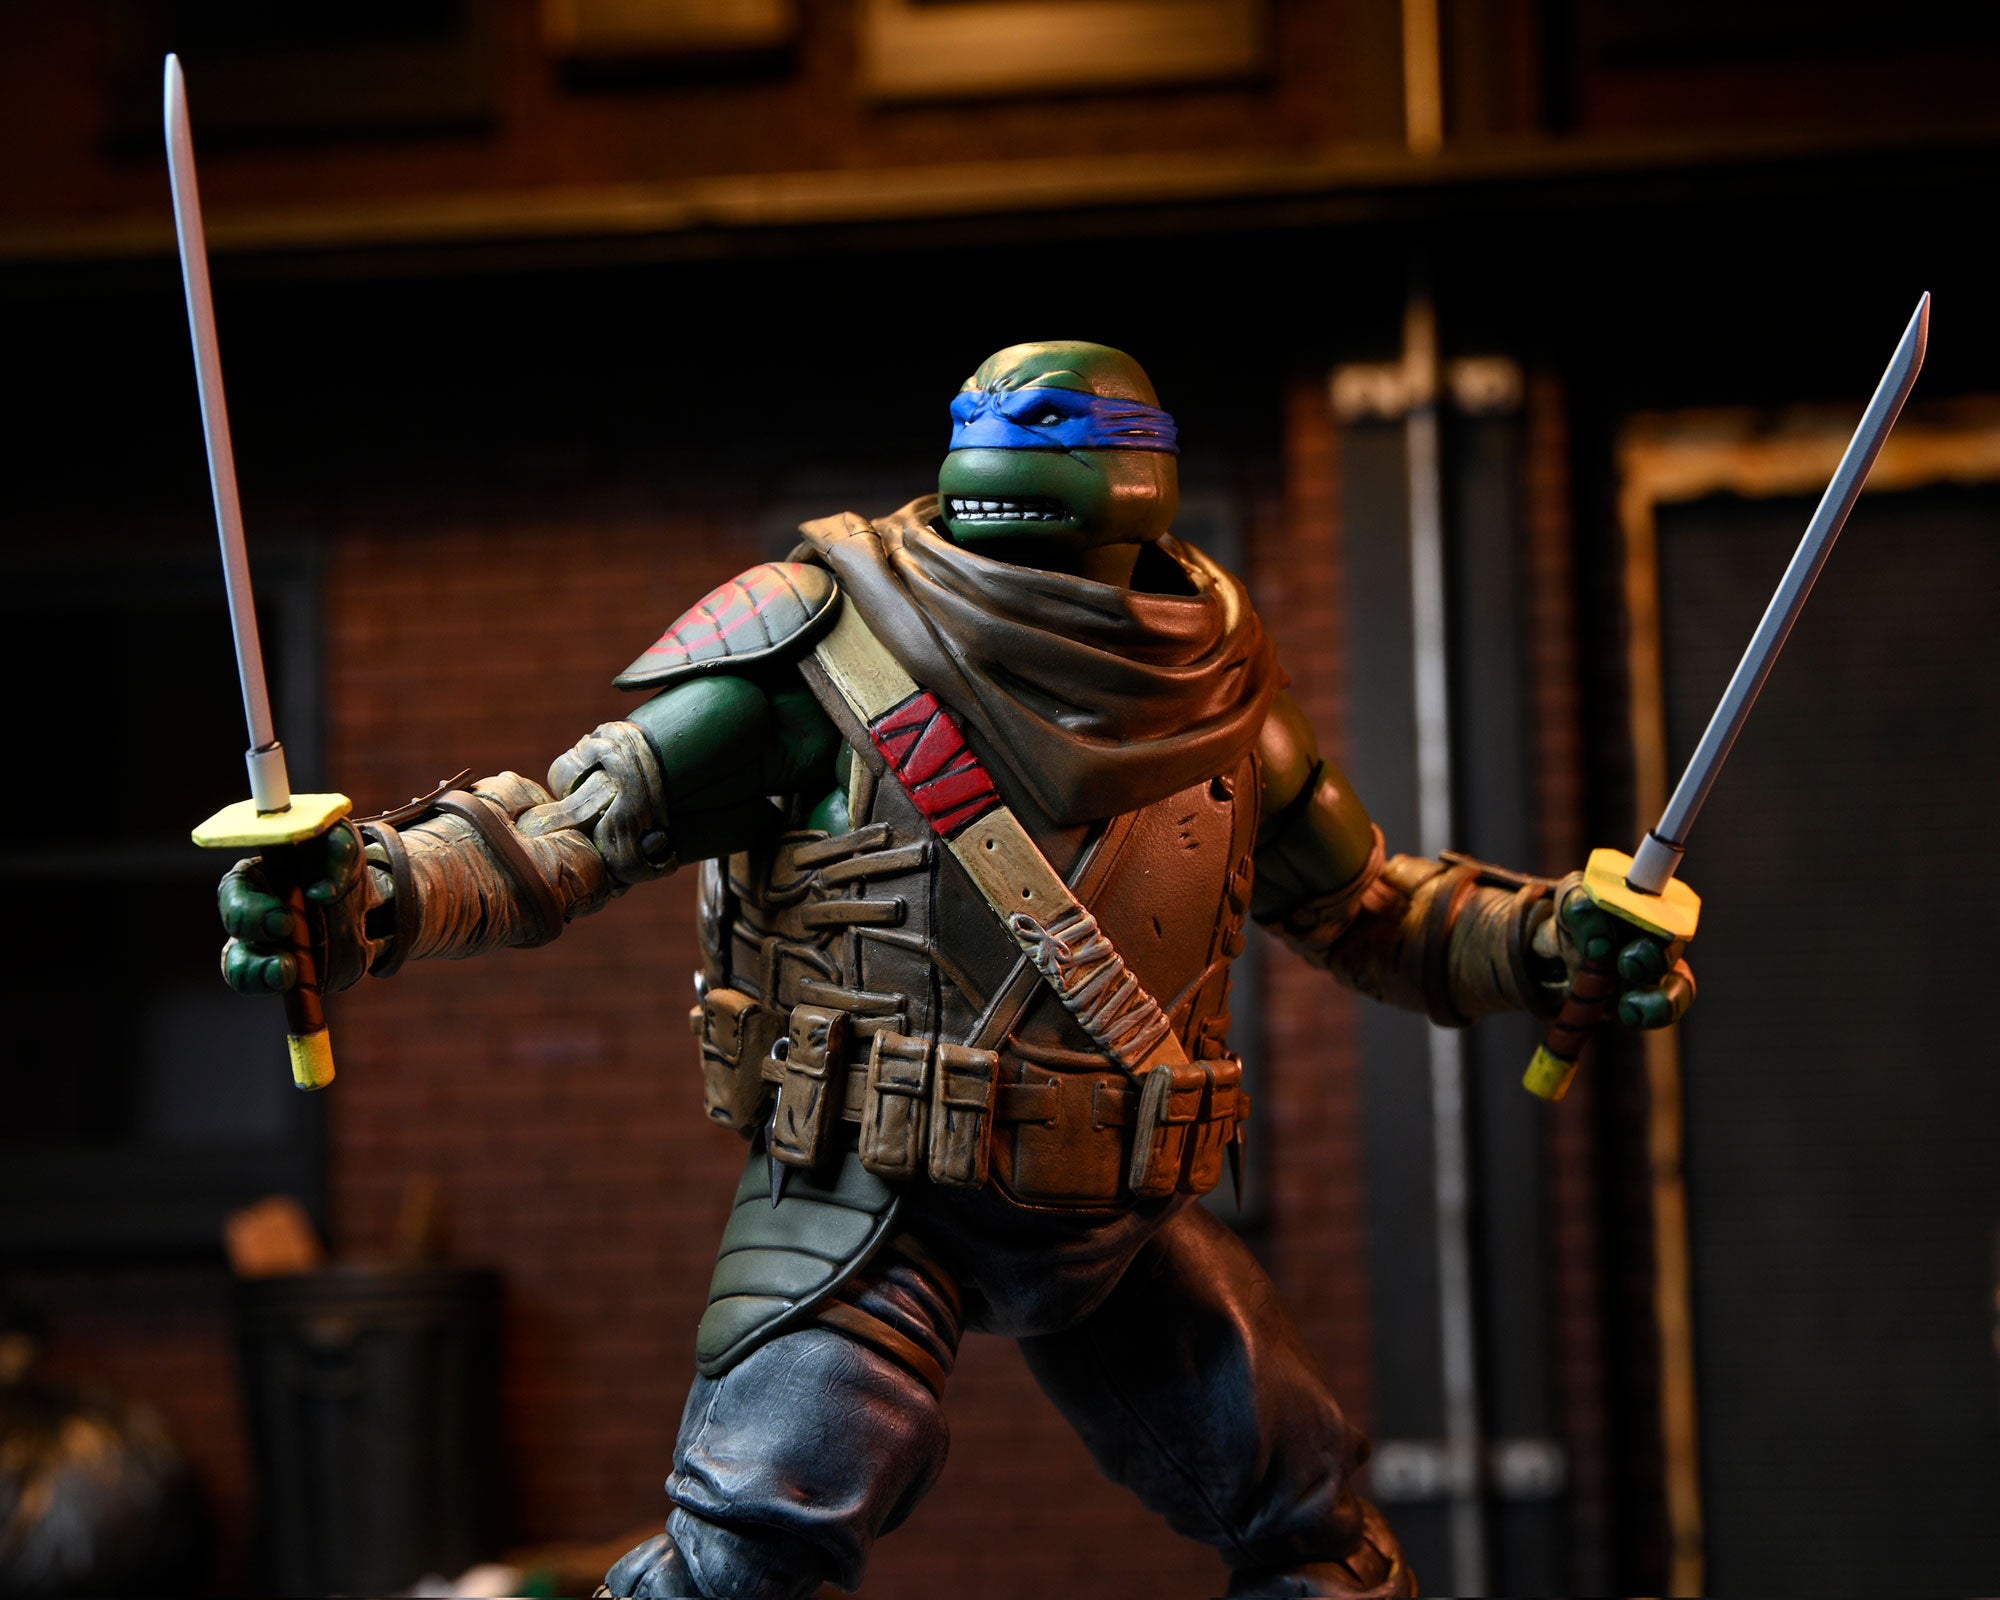 NECA Starting Preorders for TMNT Secret of the Ooze Figures and More